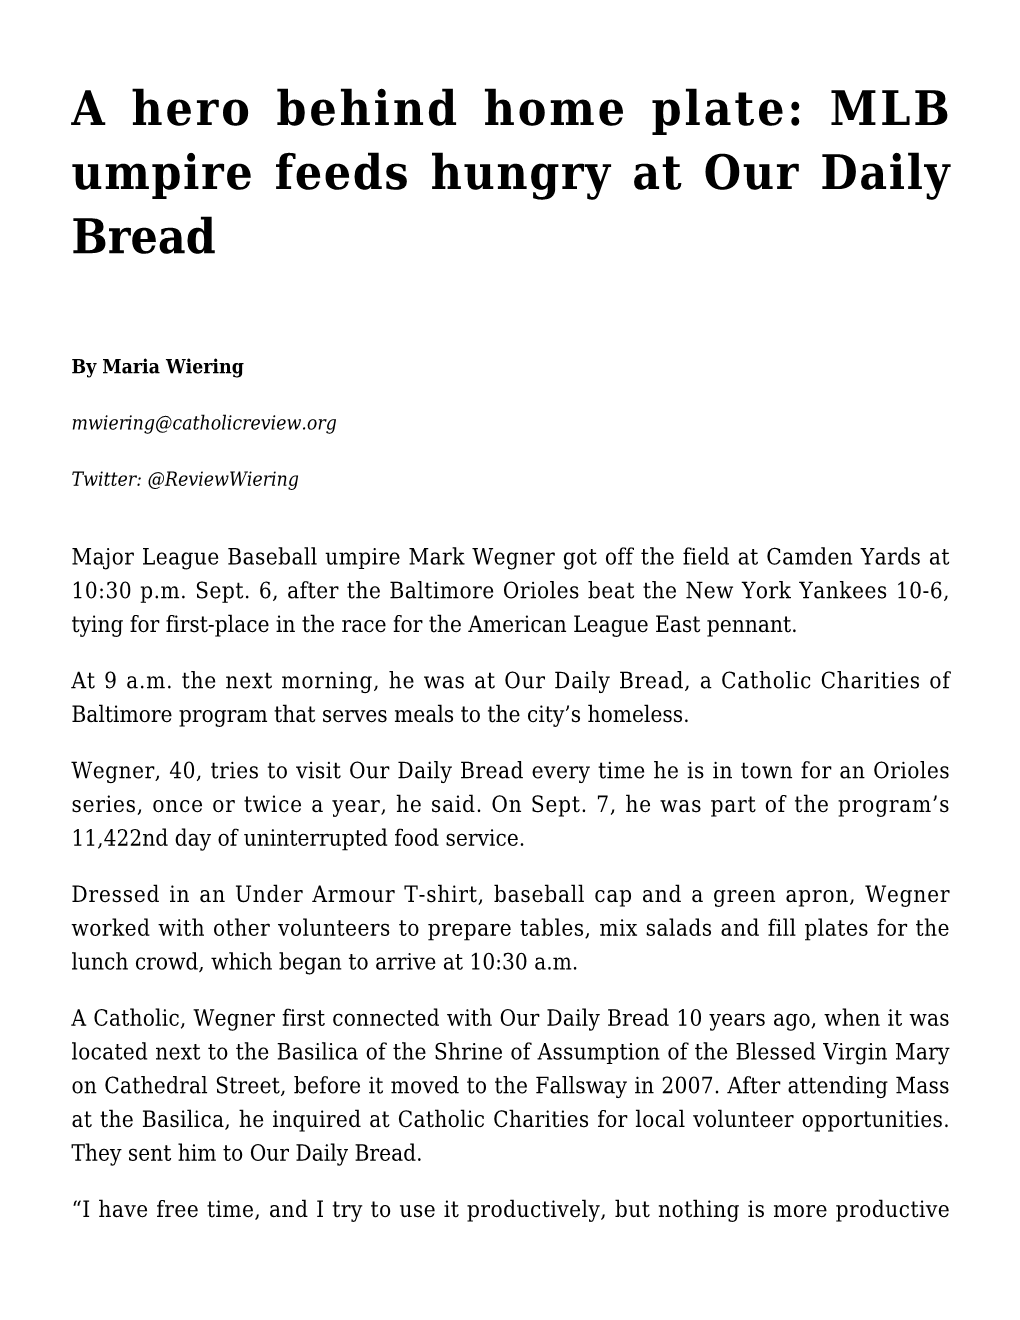 A Hero Behind Home Plate: MLB Umpire Feeds Hungry at Our Daily Bread